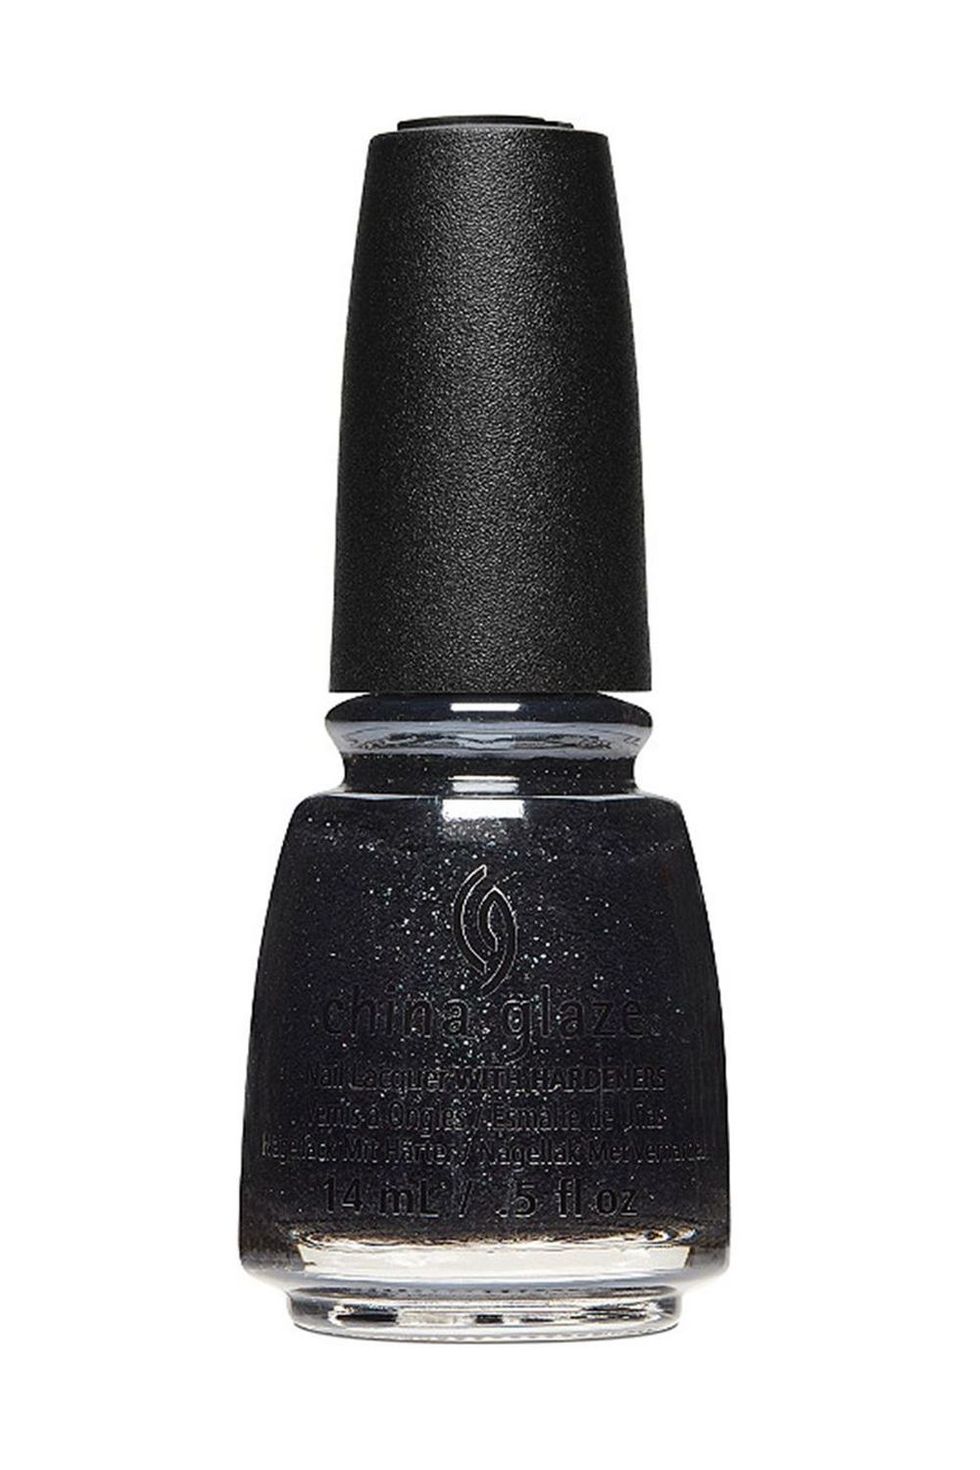 China Glaze Halloween Nail Lacquer Collection in Pret-a-Potion